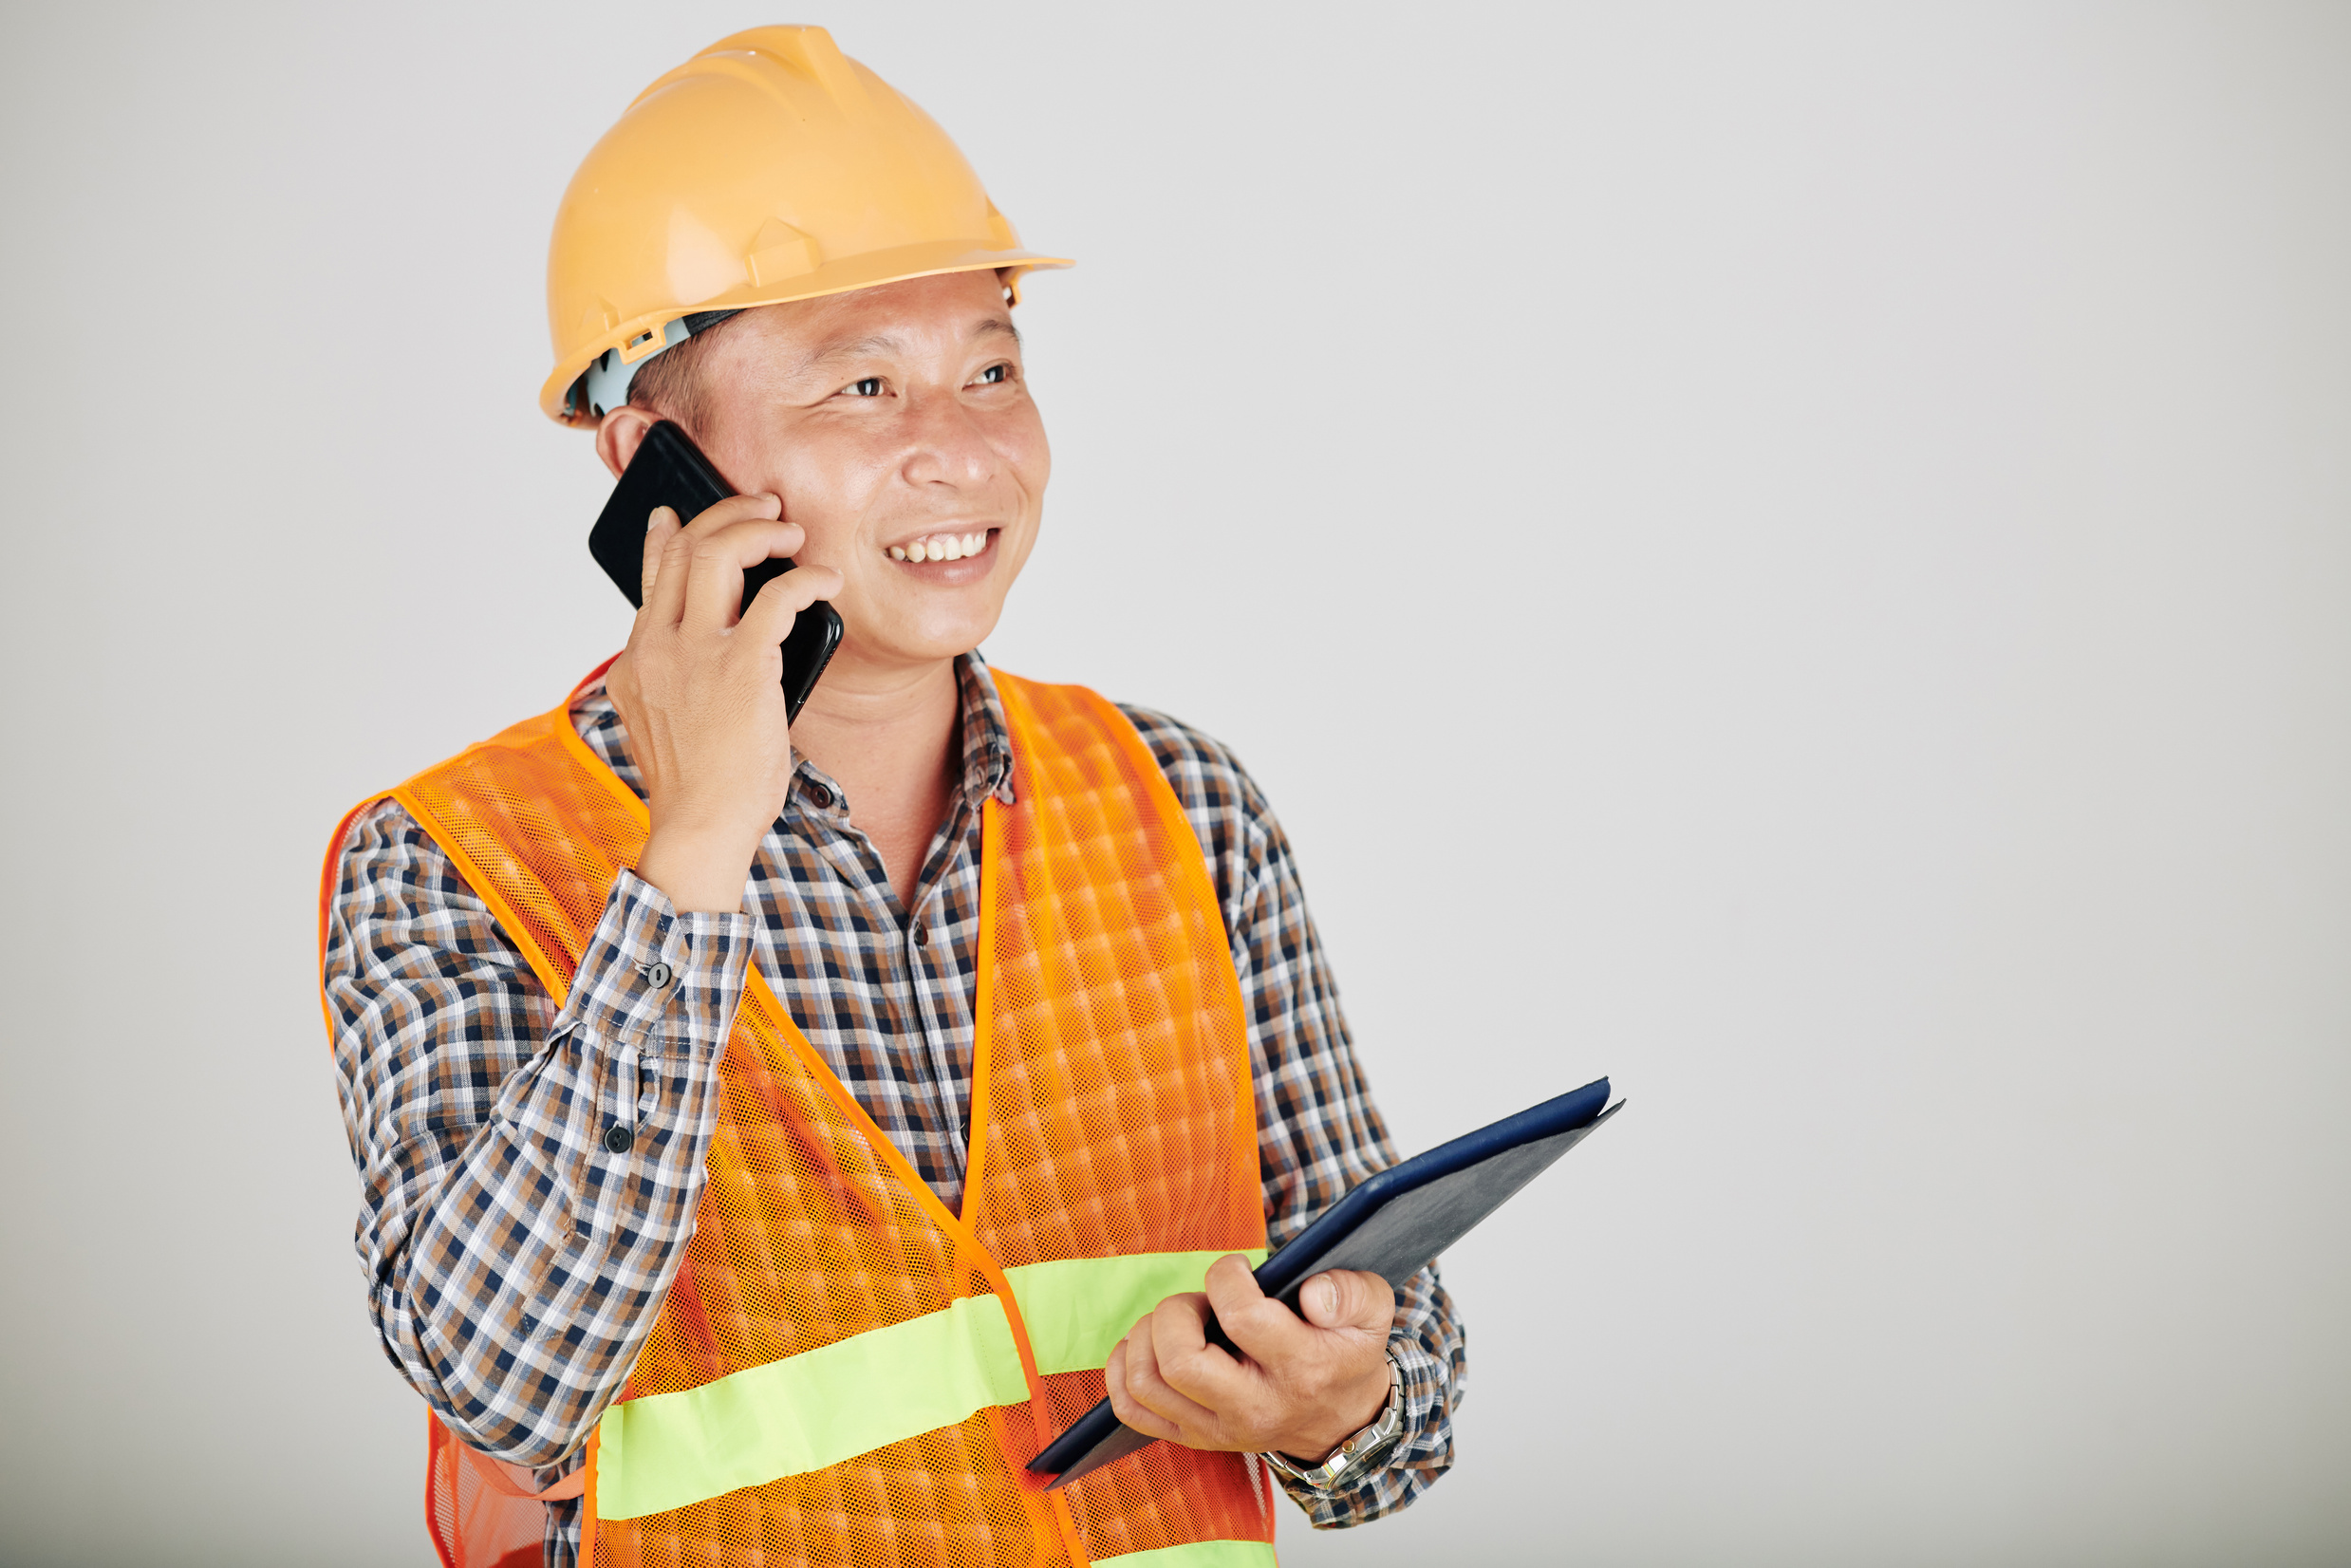 Contractor Talking on Phone